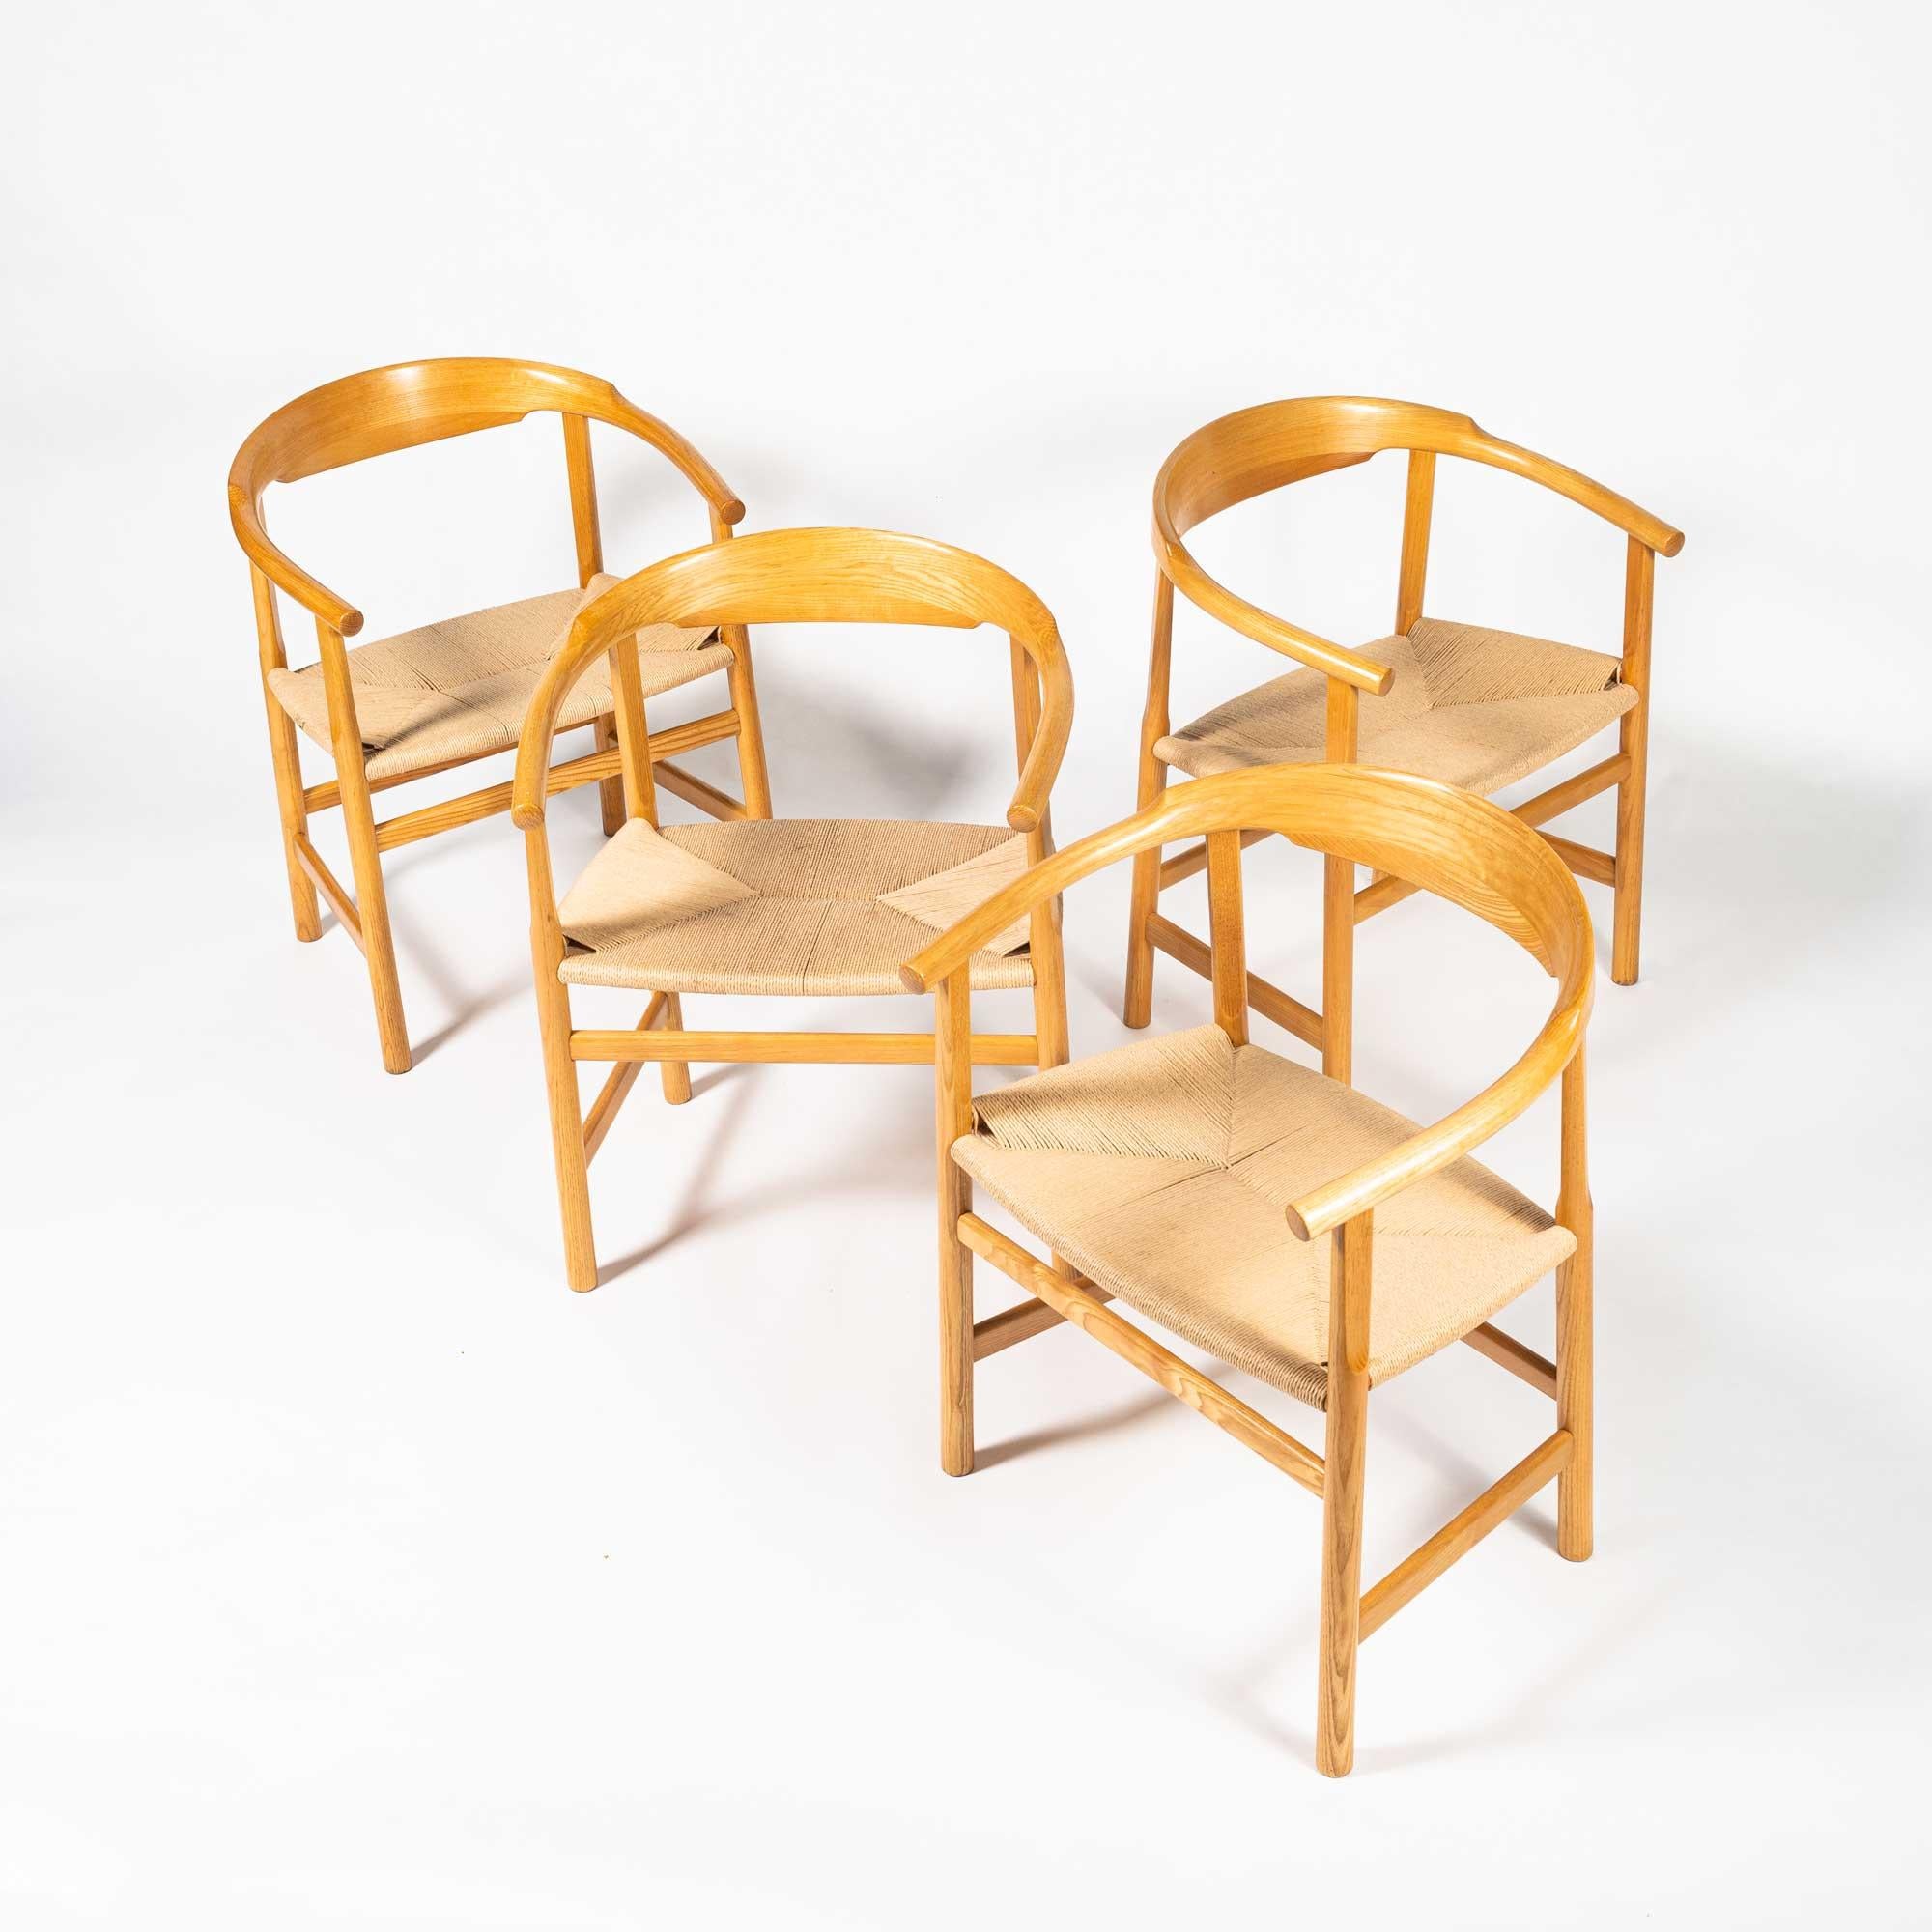 A rare set of four PP209 Hans Wegner arm chairs in oiled oak and paper-cord, produced by PP Møbler (for DSB ferries), between 1974 and 2004. Unlike the Round chair, the backrest for this model was cut from a single piece of wood and bent into shape.